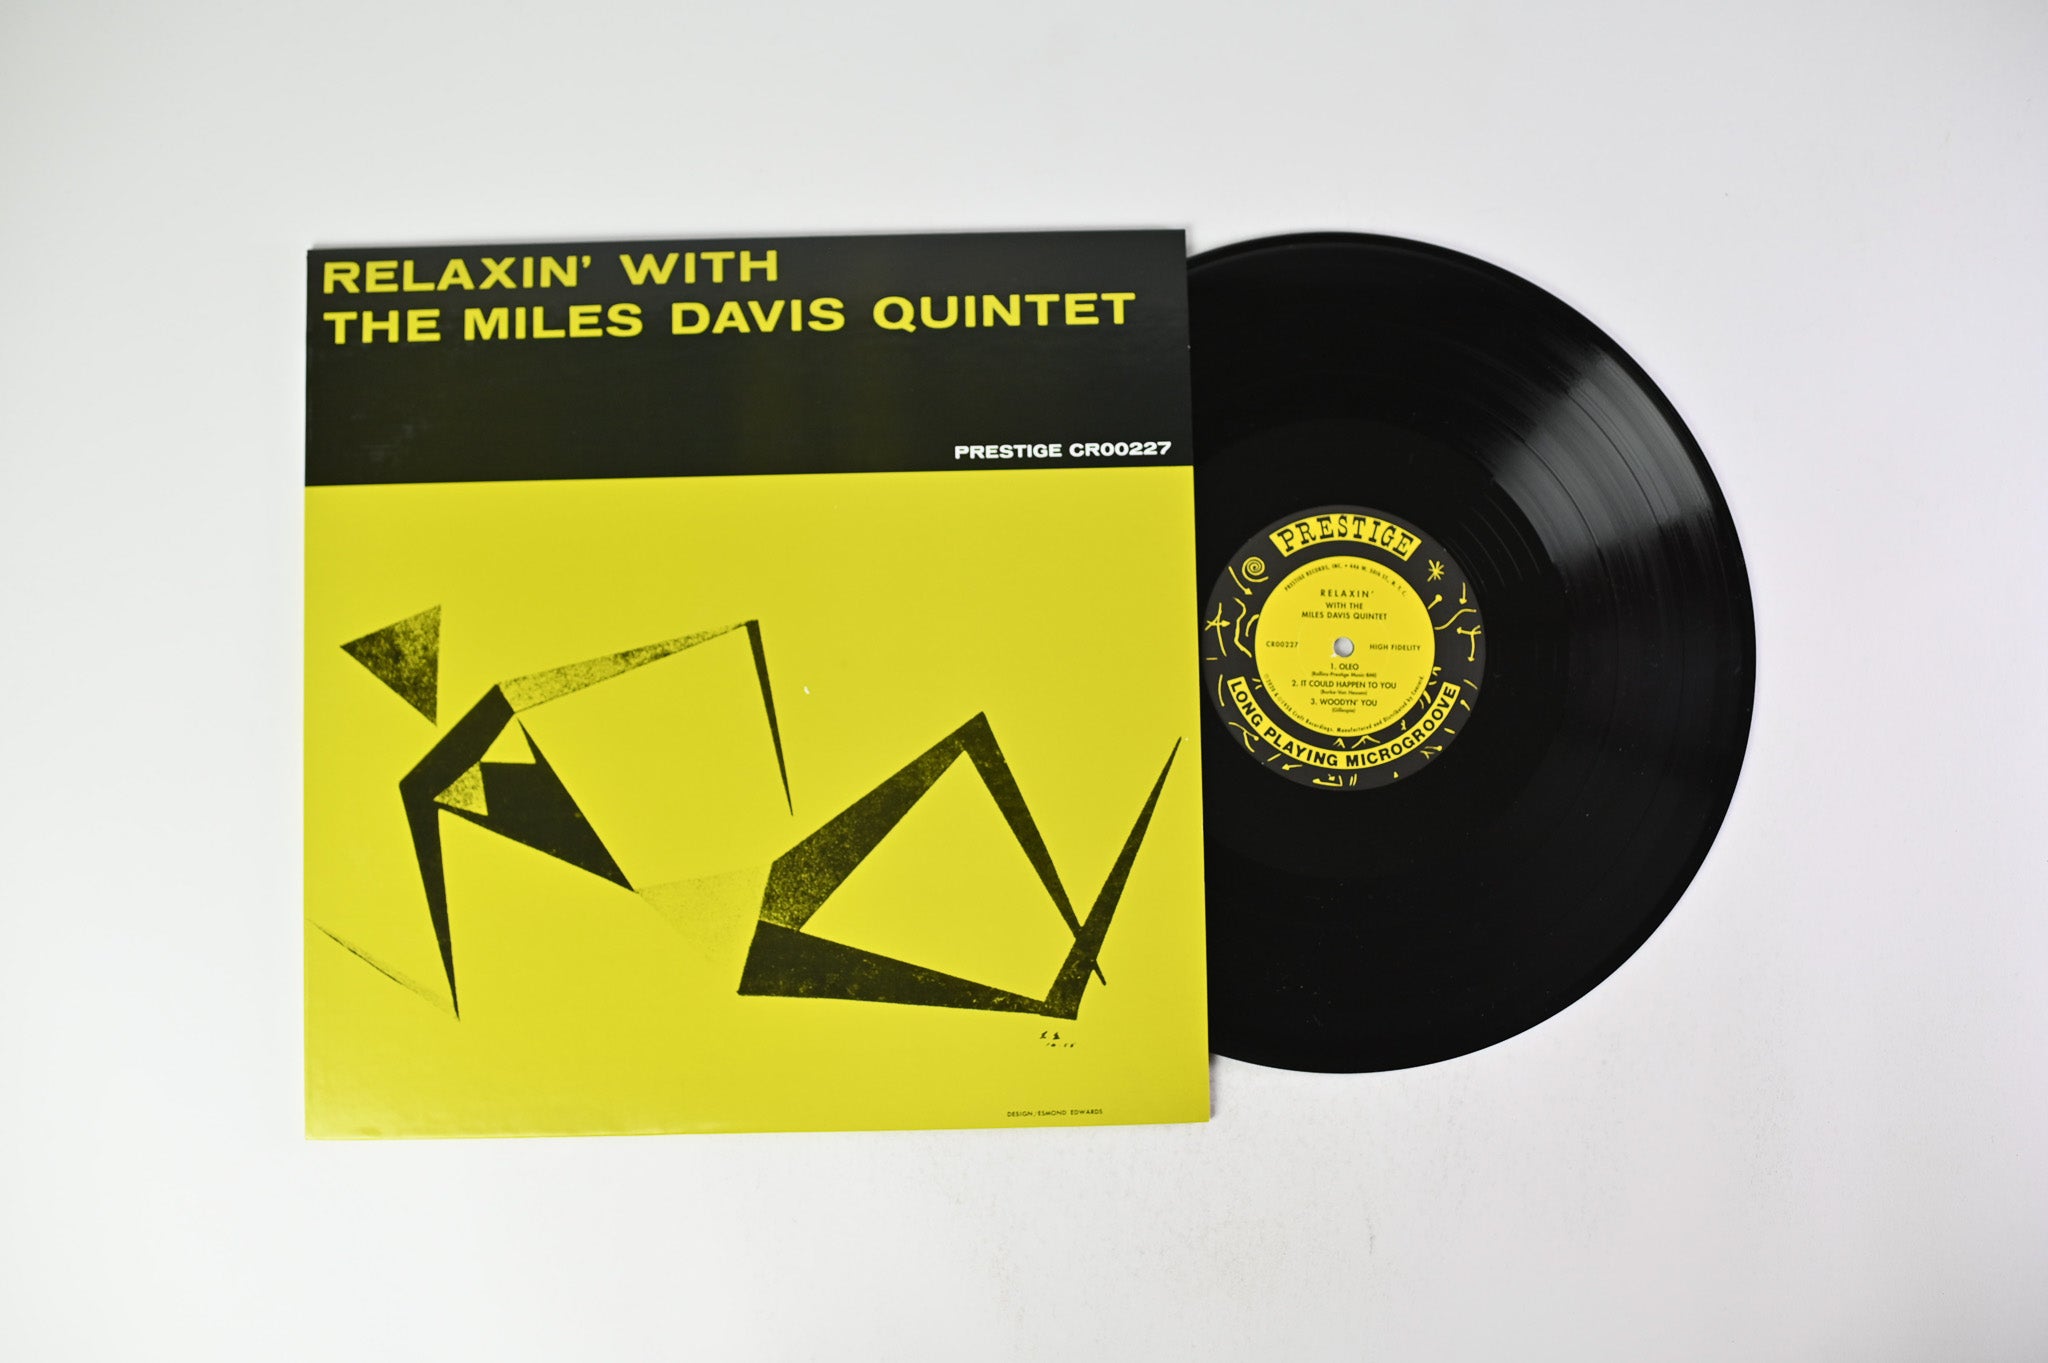 The Miles Davis Quintet - Relaxin' With The Miles Davis Quintet Numbered Reissue on Craft Recordings/Prestige